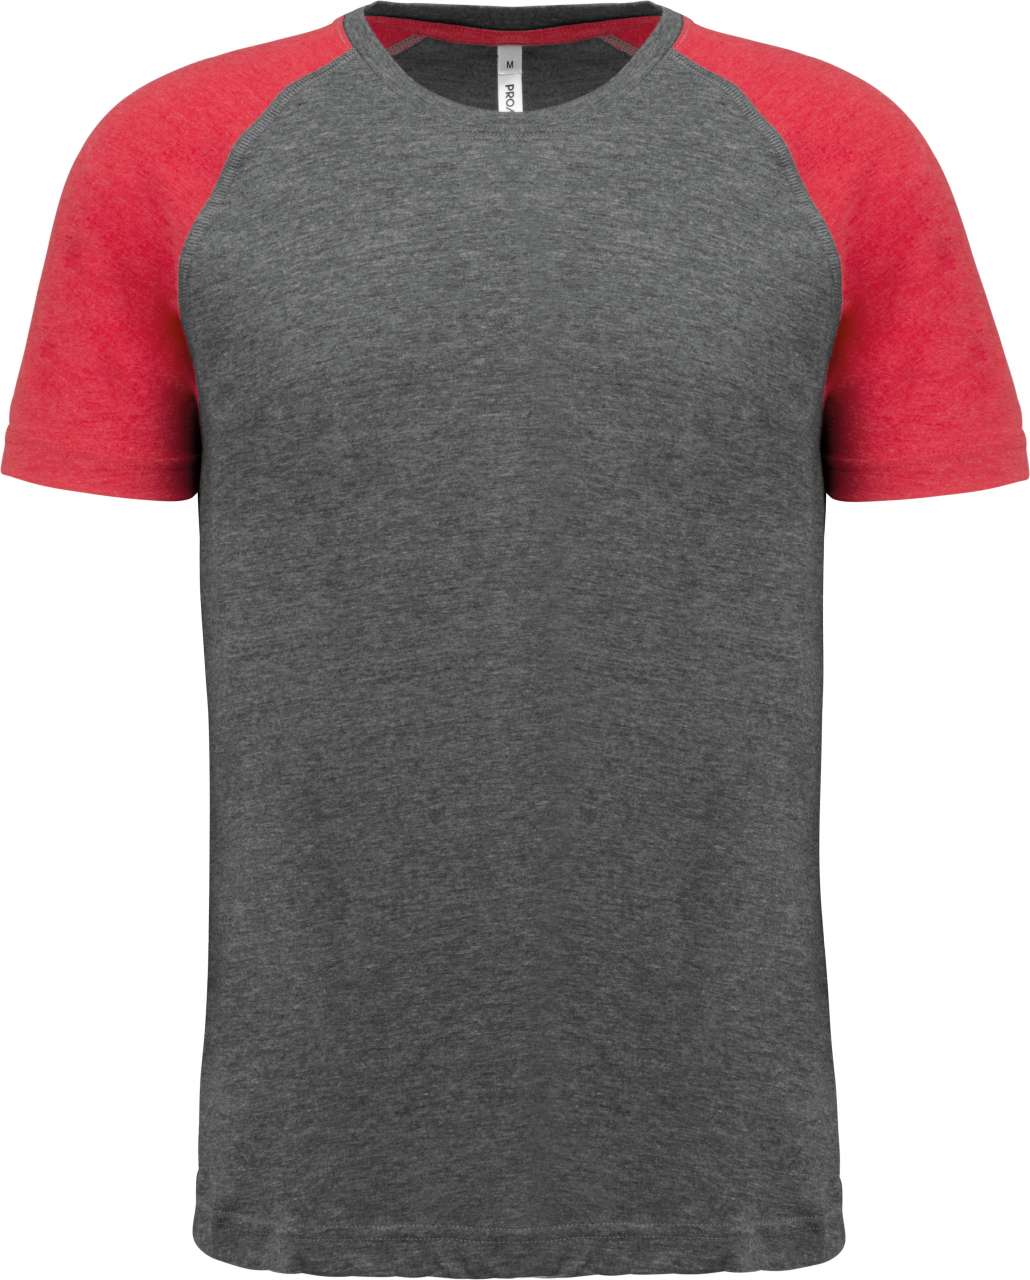 Promo  ADULT TRIBLEND TWO-TONE SPORTS SHORT-SLEEVED T-SHIRT